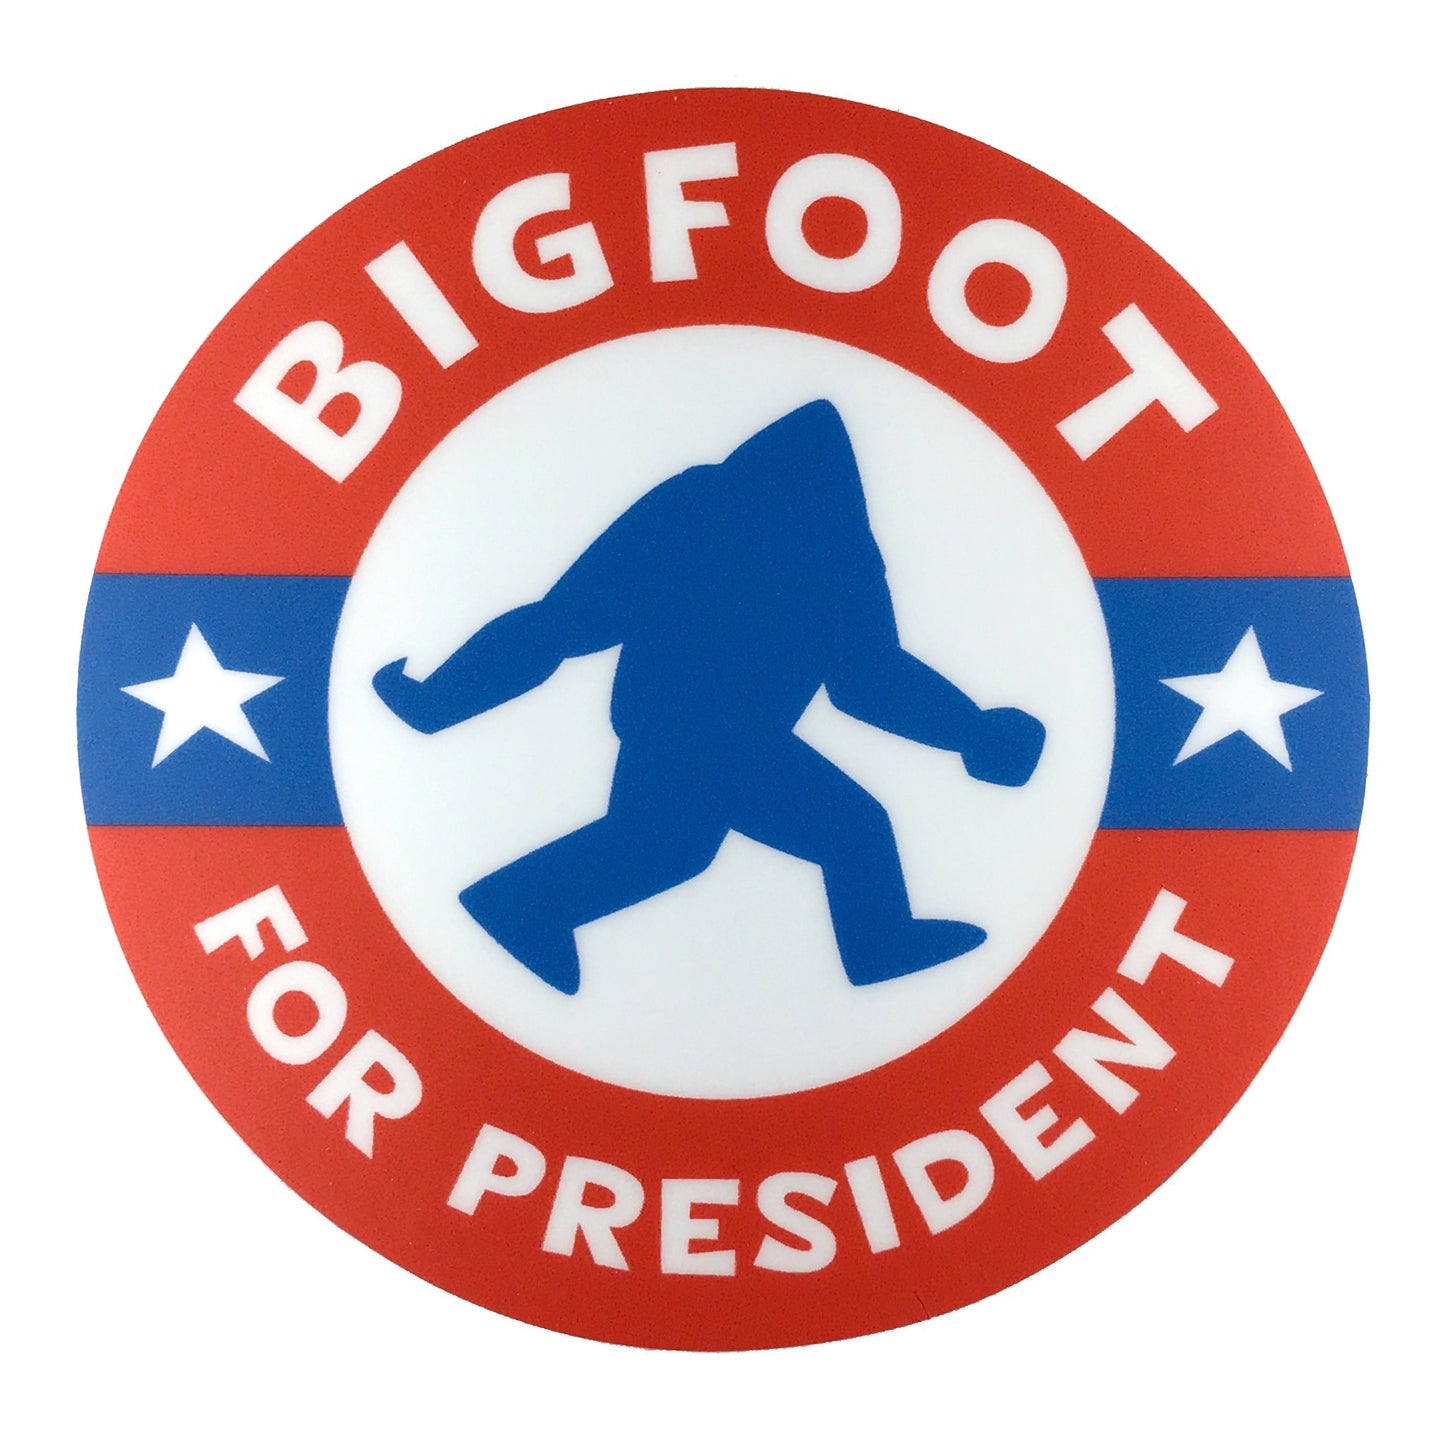 Bigfoot For President funny political campaign sticker by Monsterologist